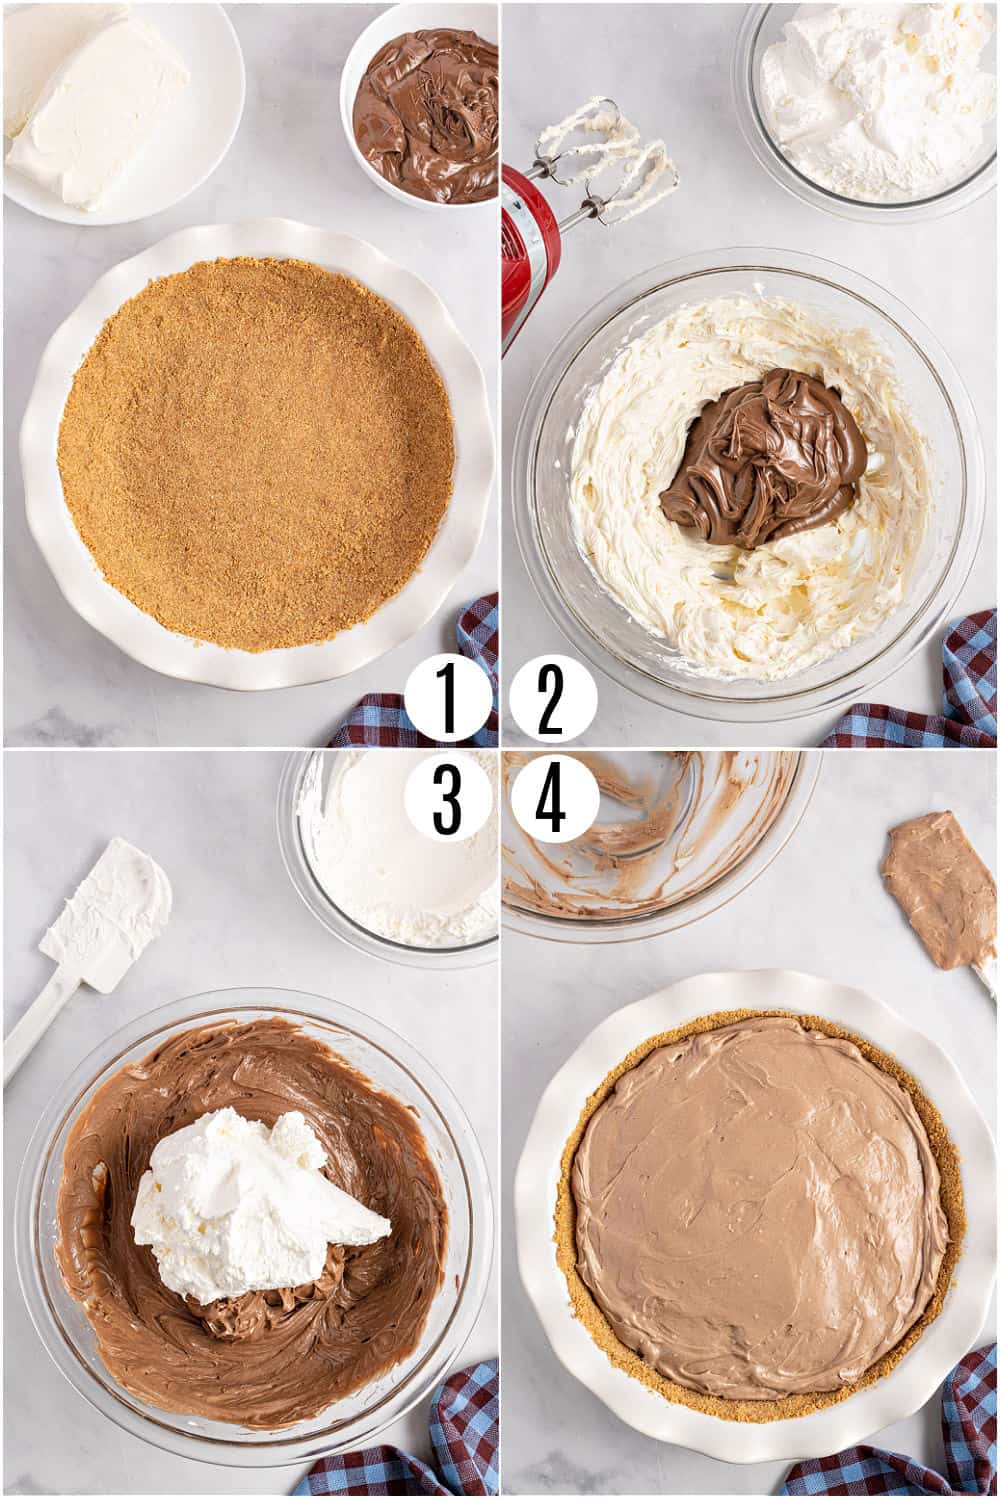 Step by step photos showing how to make no bake nutella pie.